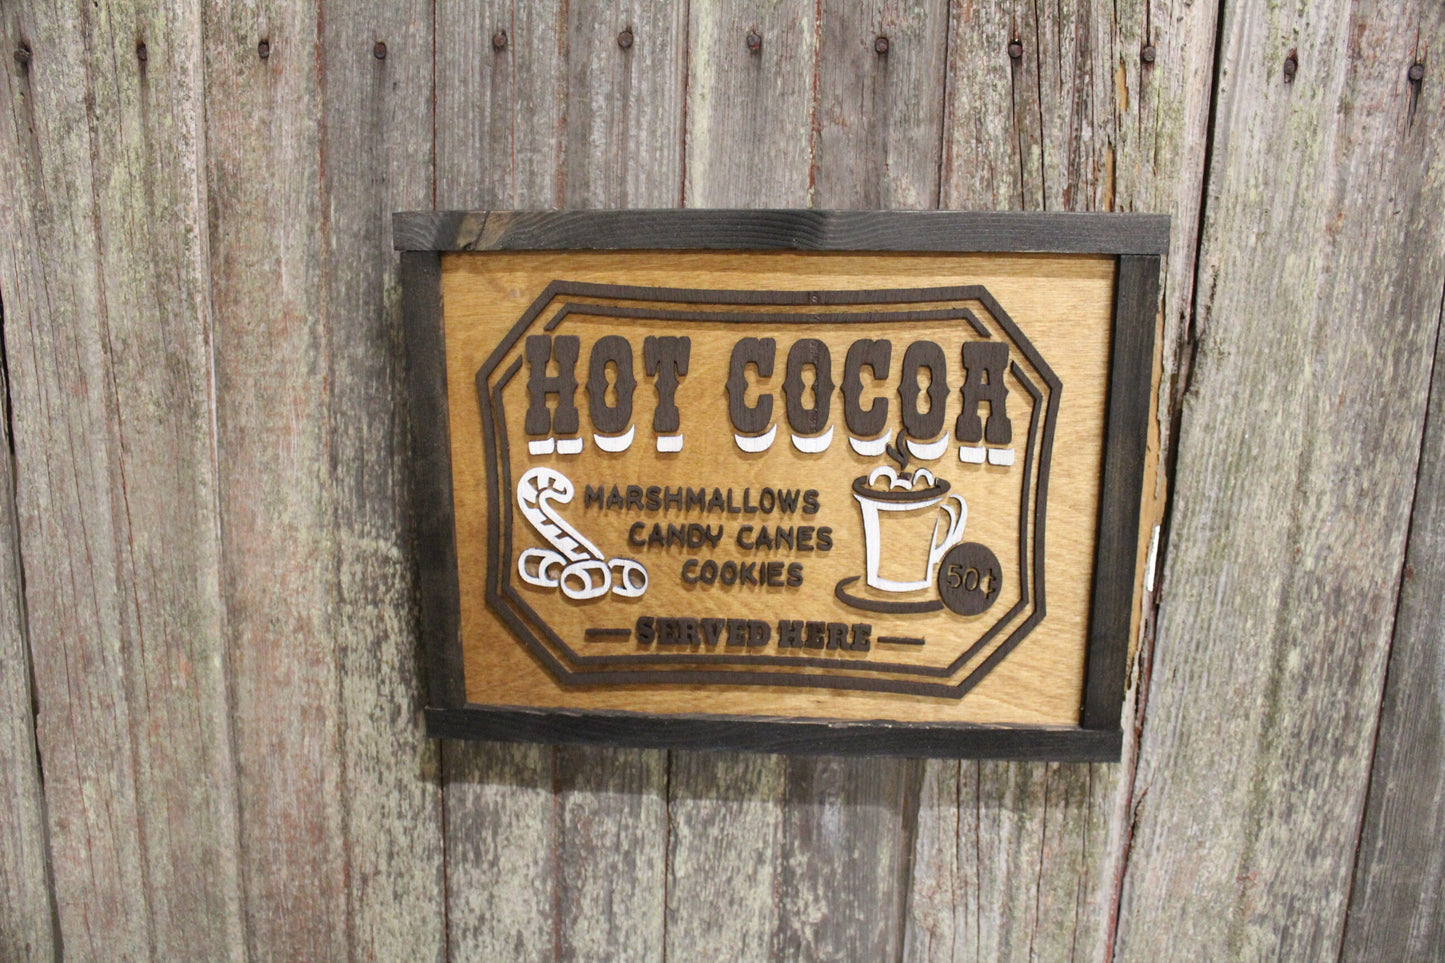 Hot Cocoa Wood Sign Chocolate Winter Cold Brr Served Here Marshmallows Candy Cane Cookies Coco Bar 3D Raised Text Country Cabin Decor